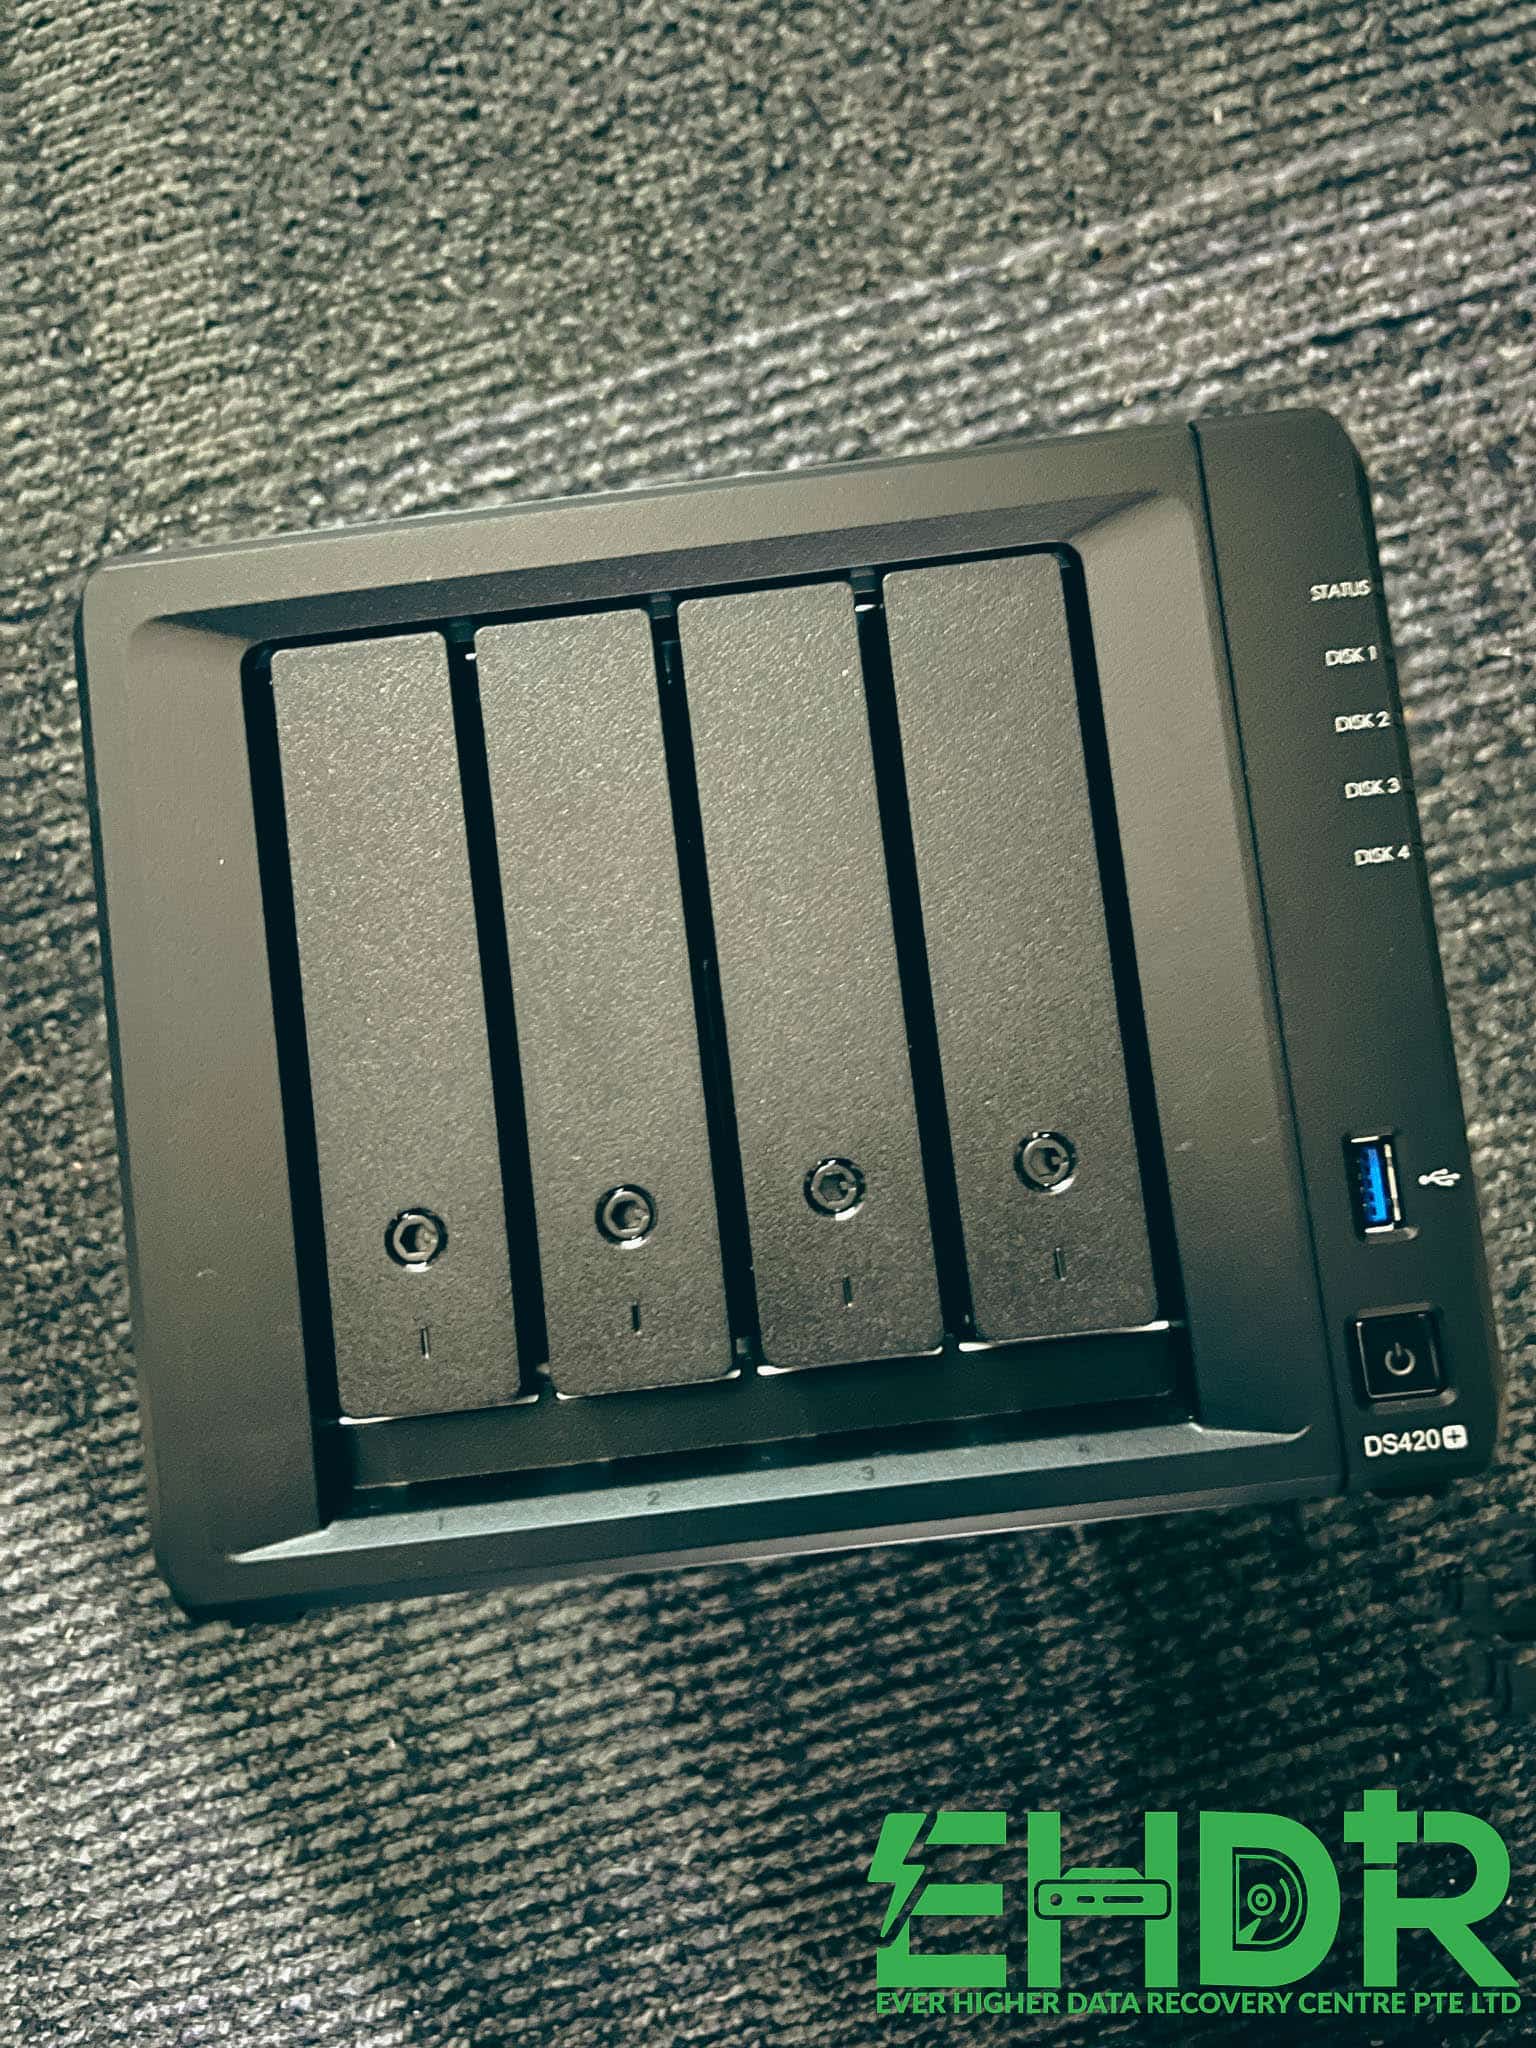 23 June 2022 – Synology NAS- Singapore Data Recovery